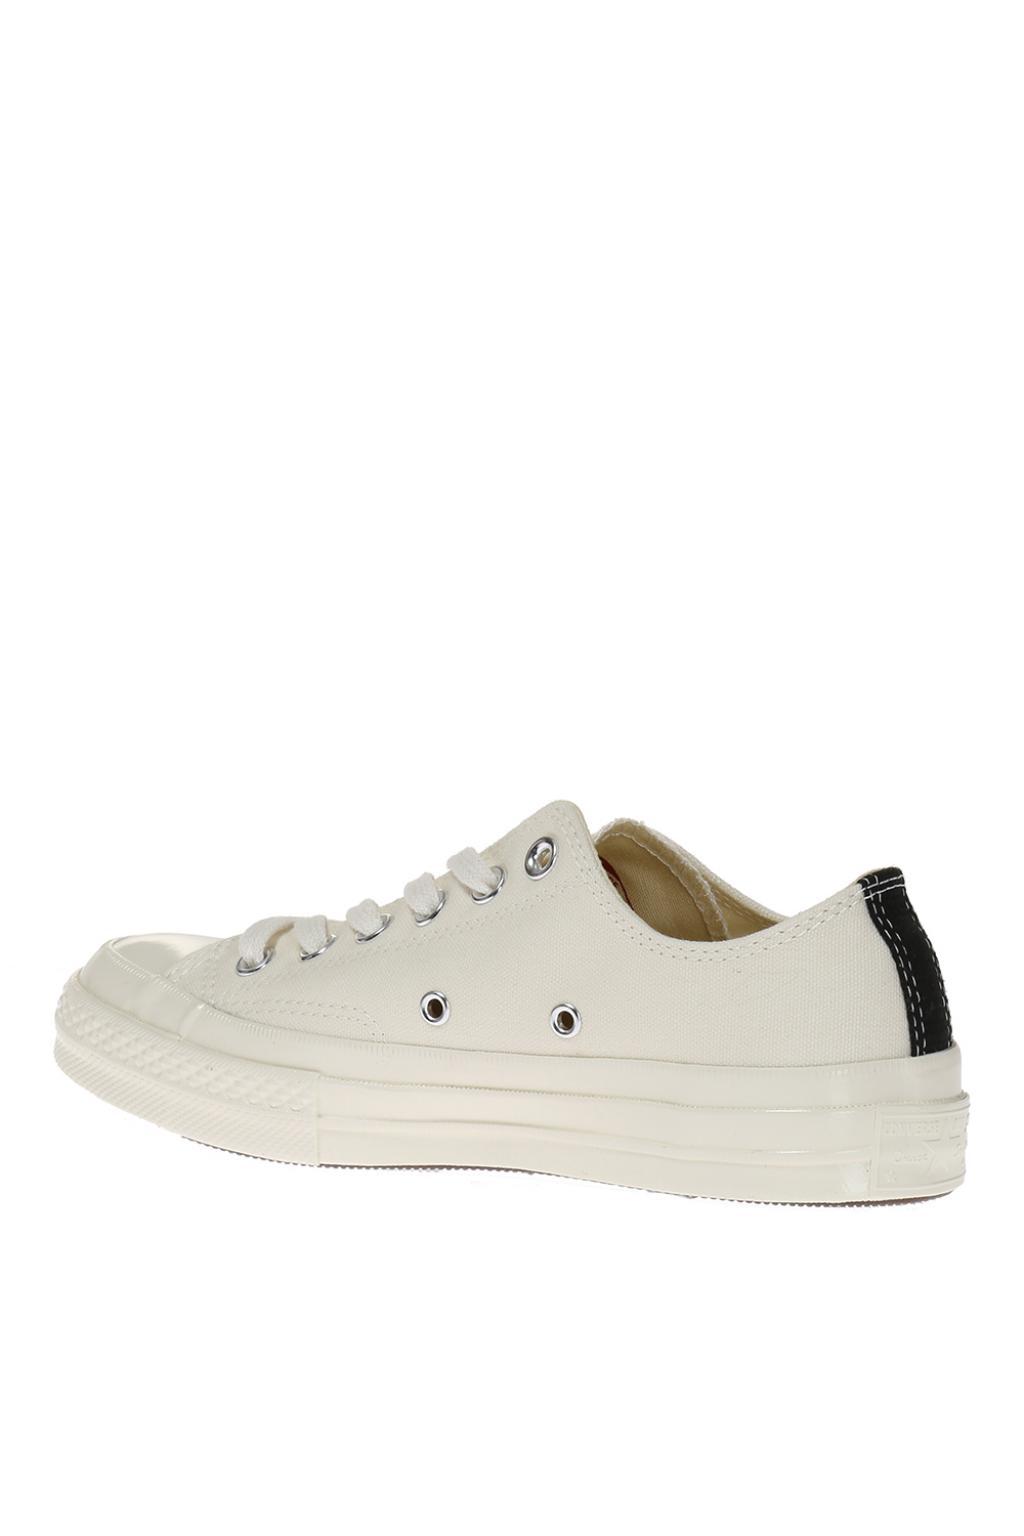 Shopping > converse cdg vitkac, Up to 65% OFF